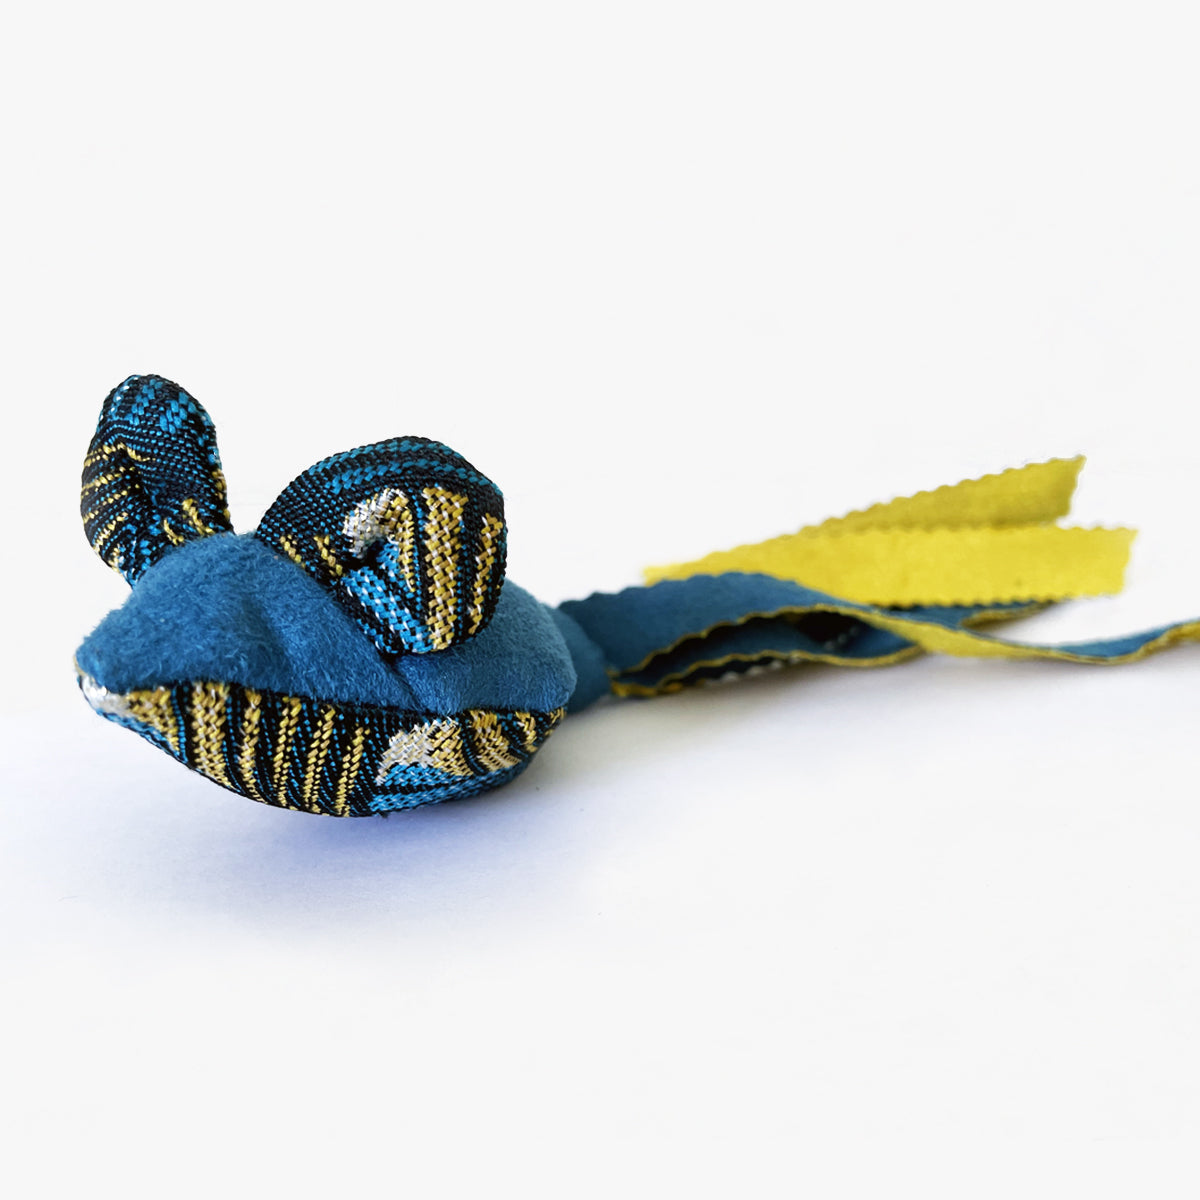 Homycat Catnip Mouse Toy, In Blue Fabric | at Made Moggie